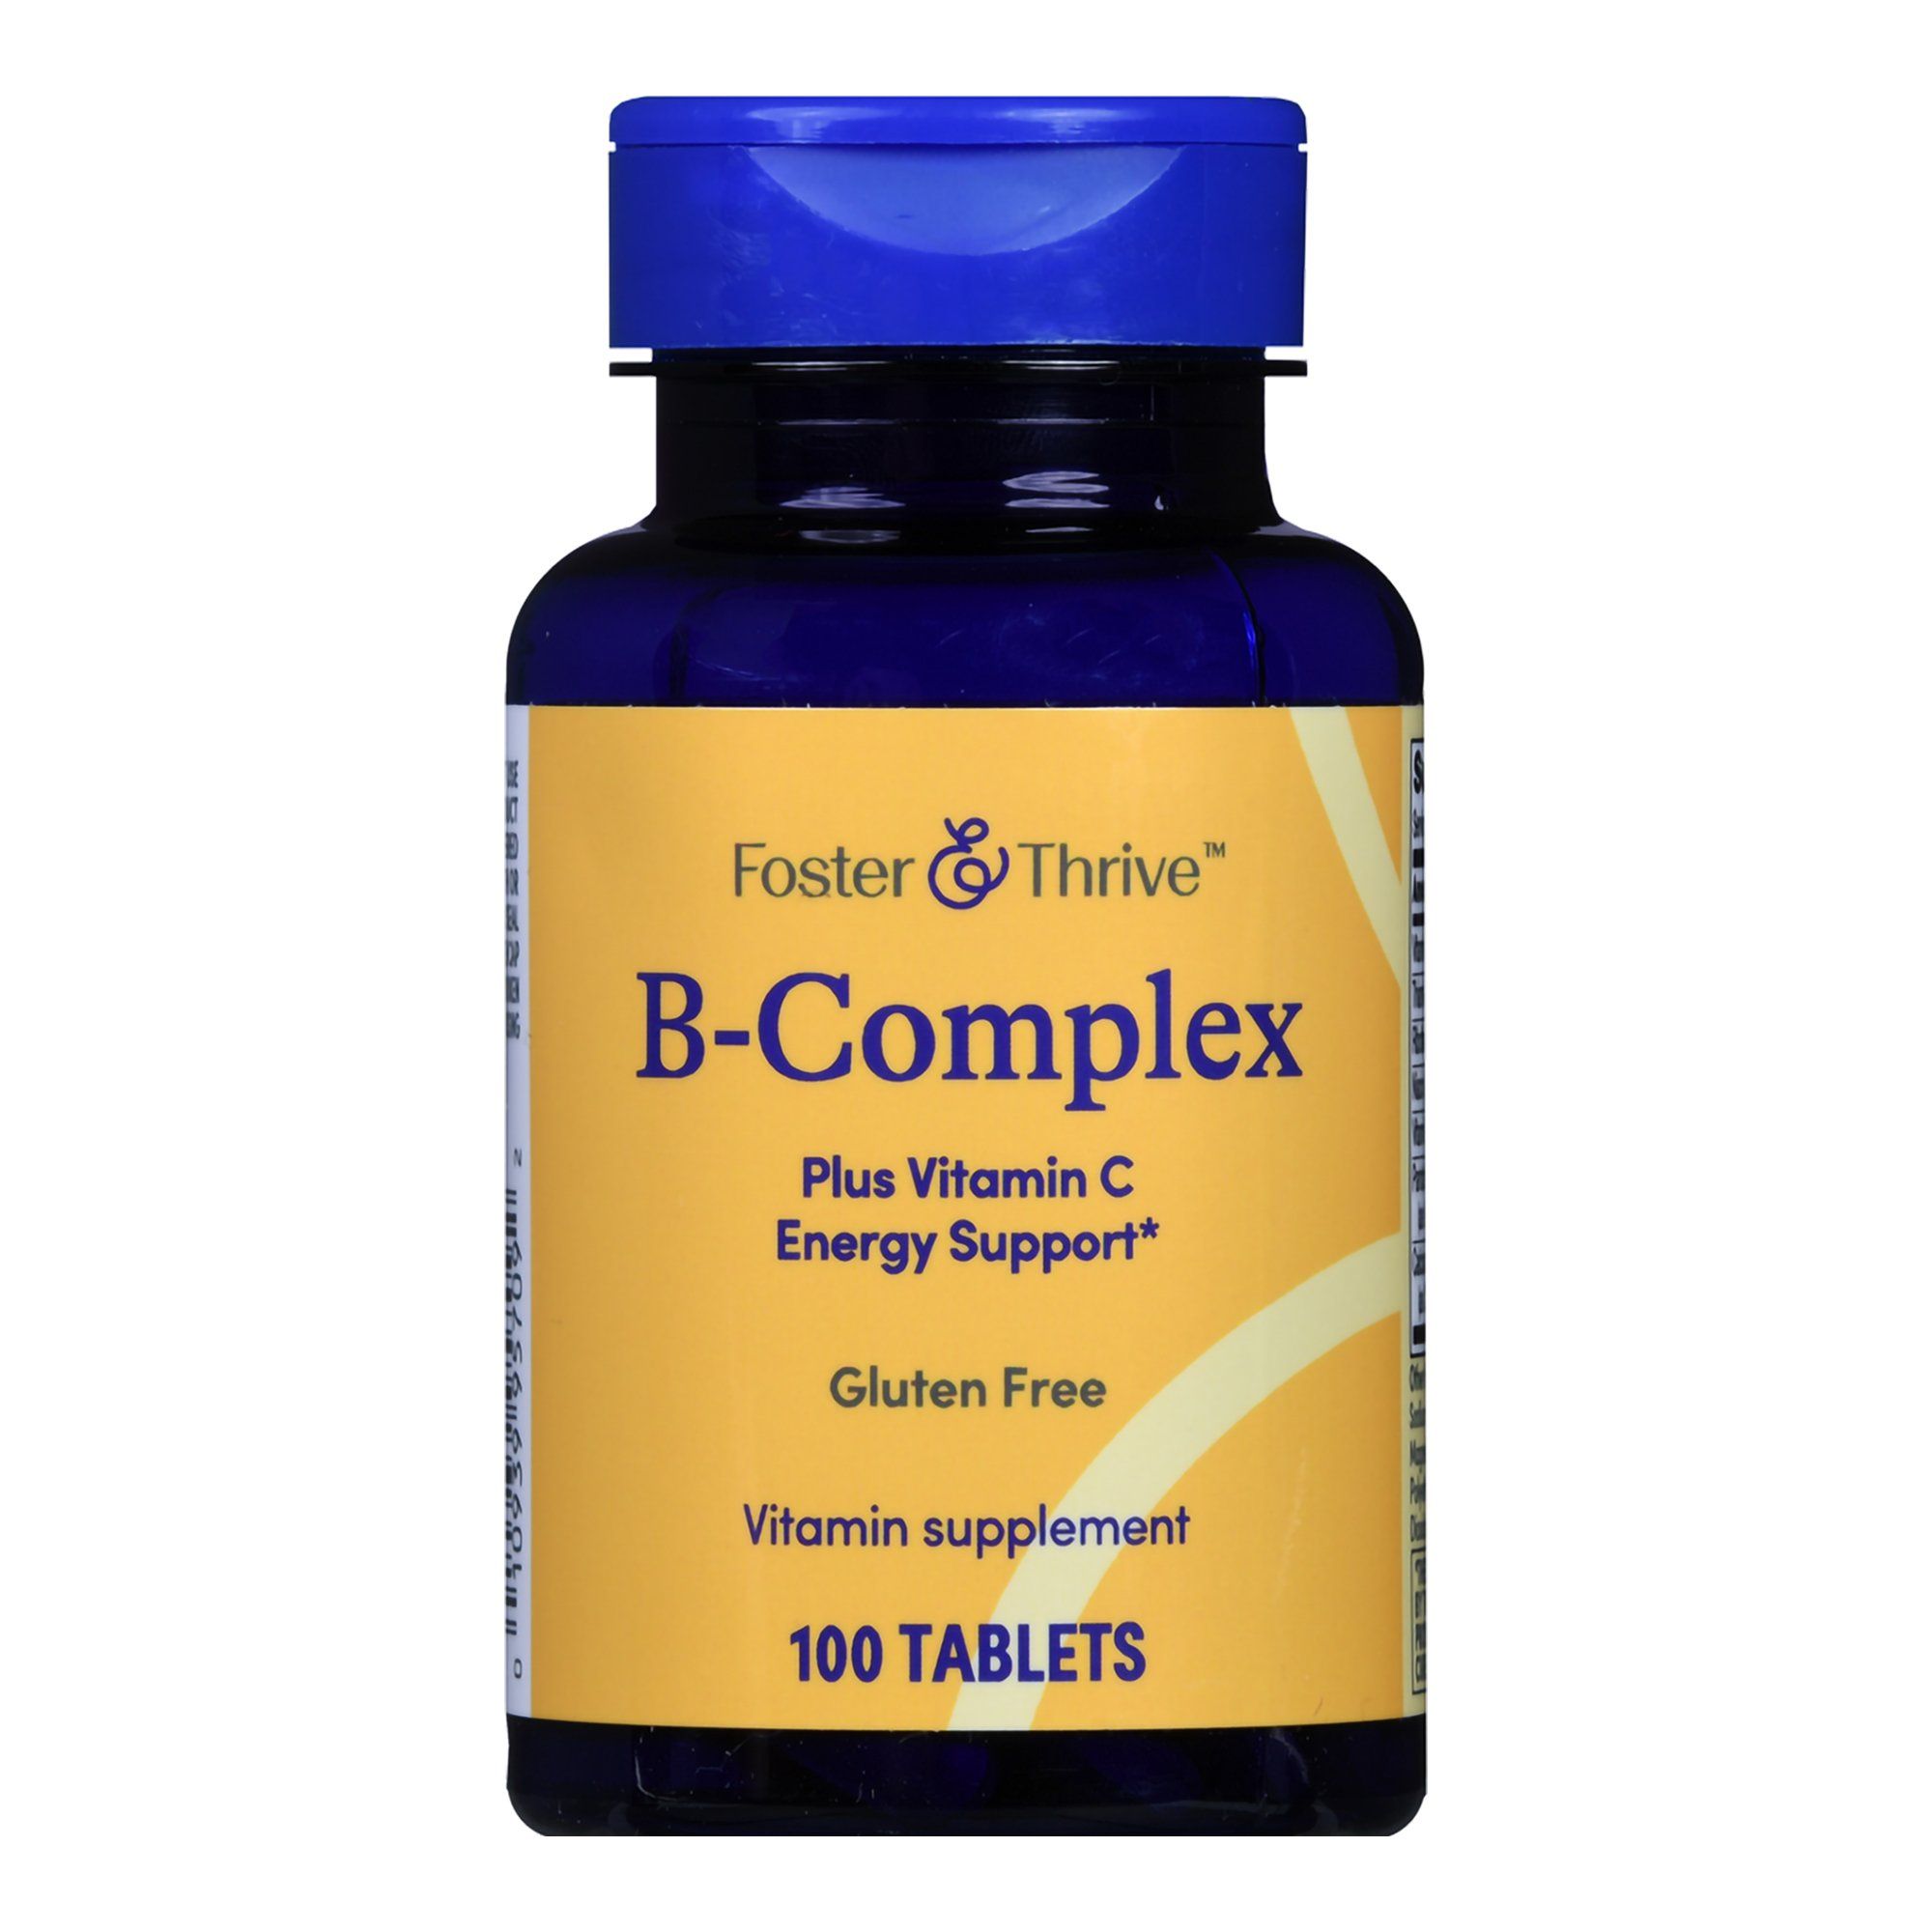 Foster & Thrive B-Complex Tablets - 100 ct